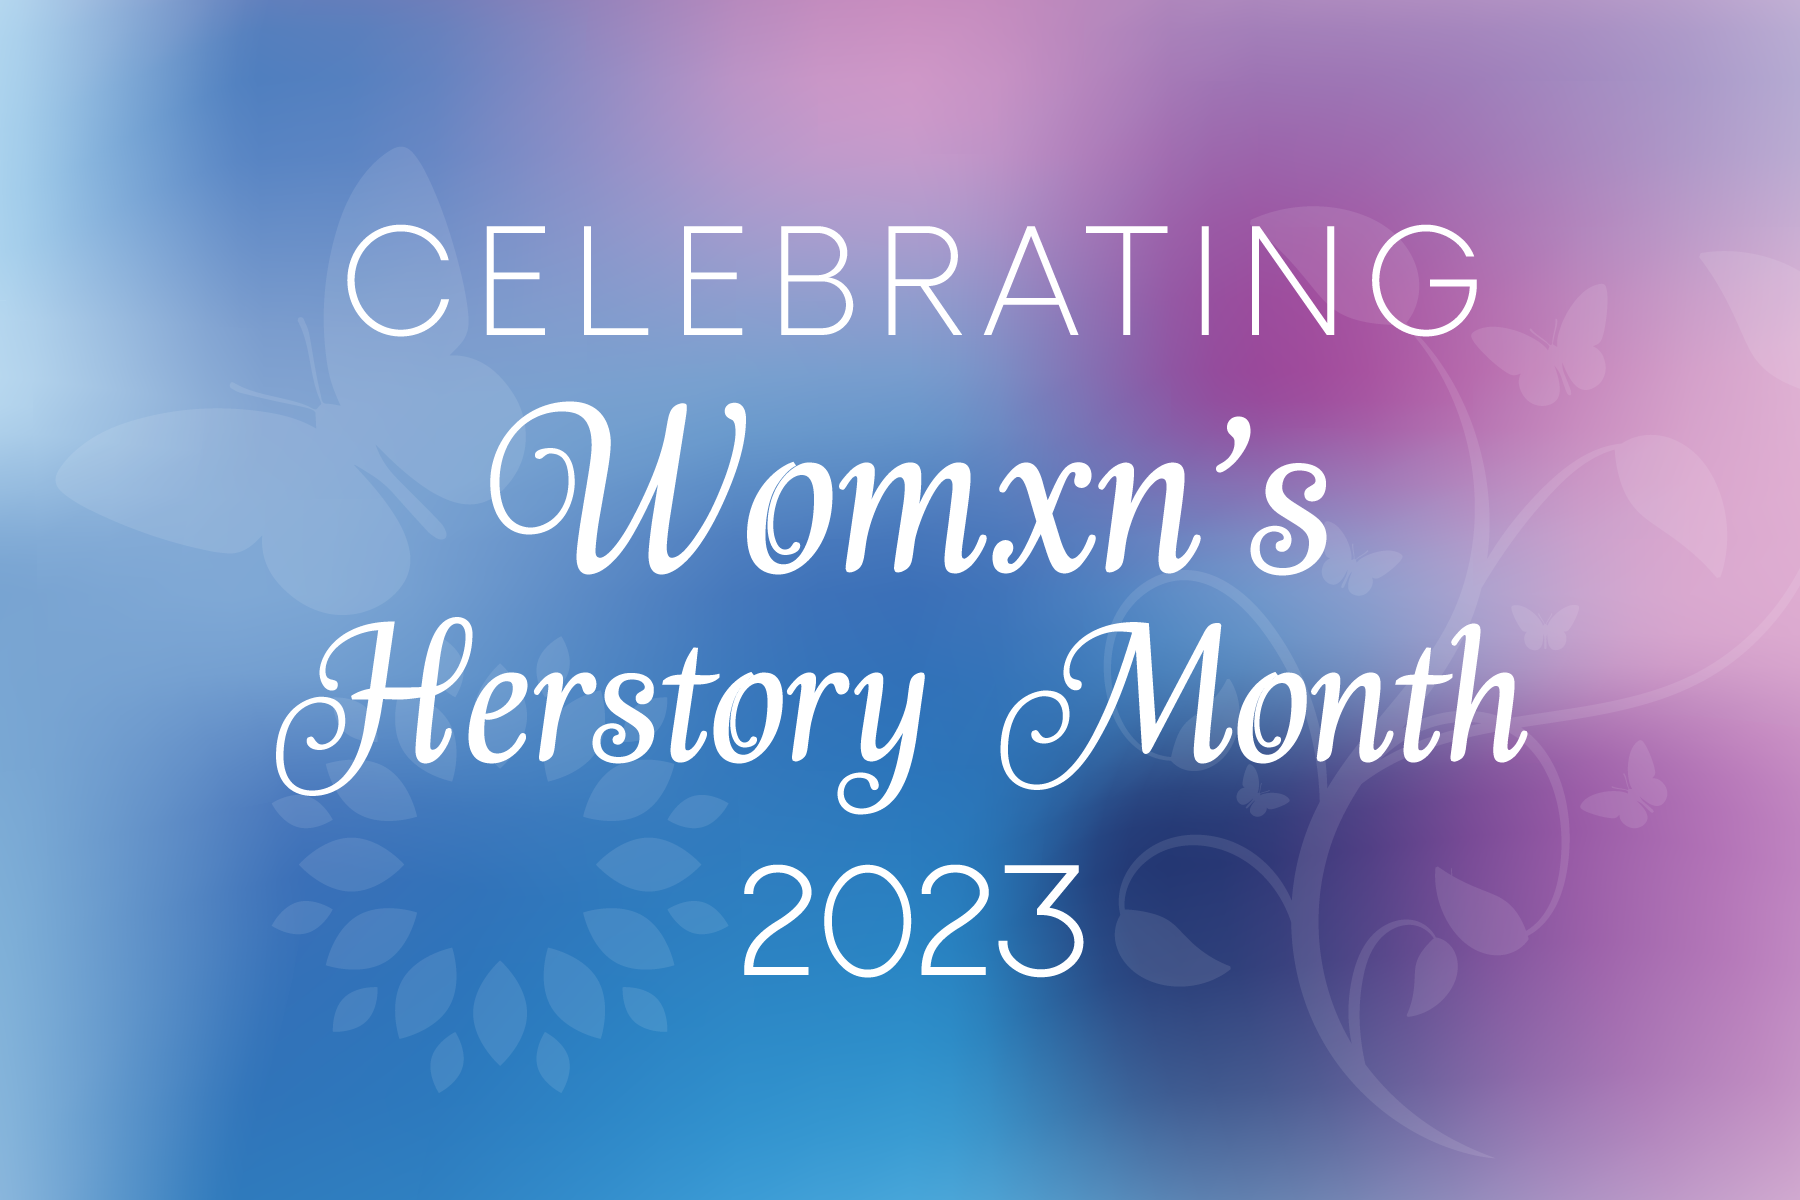 Blue and purple gradient with Celebrating 2023 Womxn's Herstory Month in text.